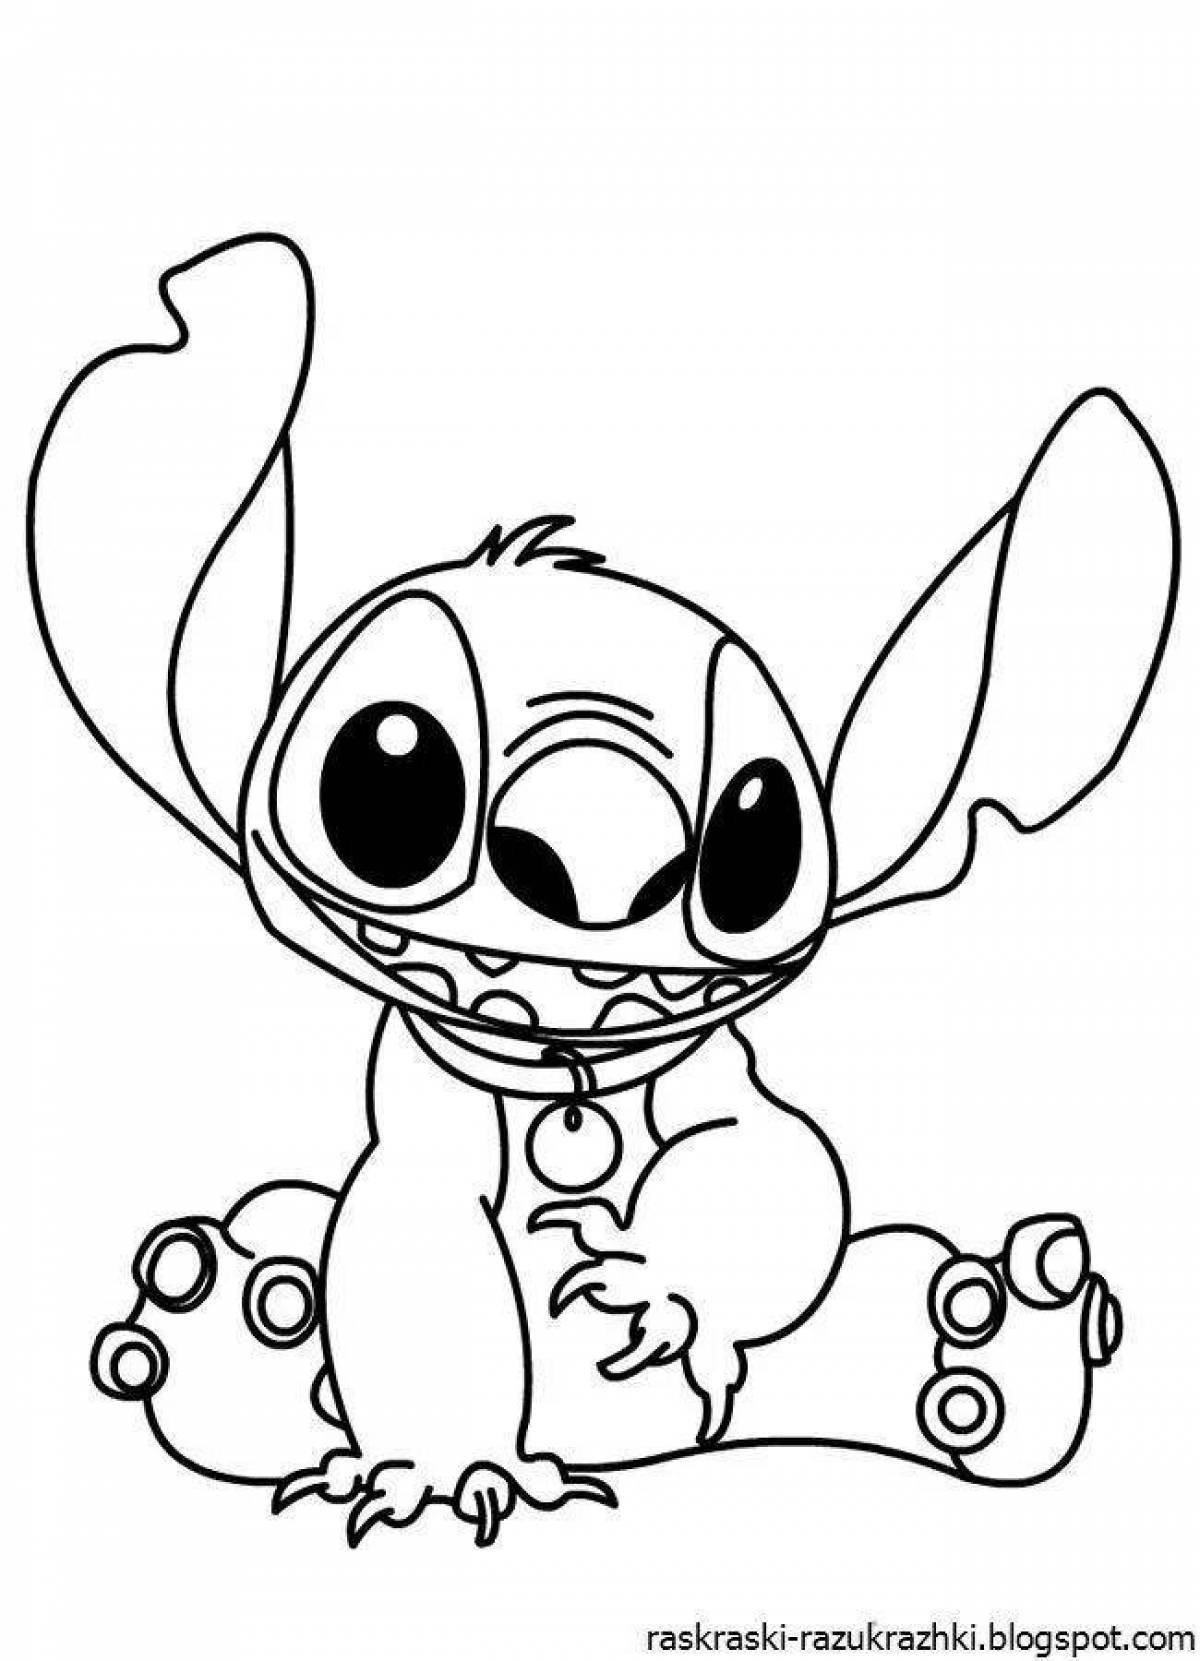 Lovely coloring cute stitch